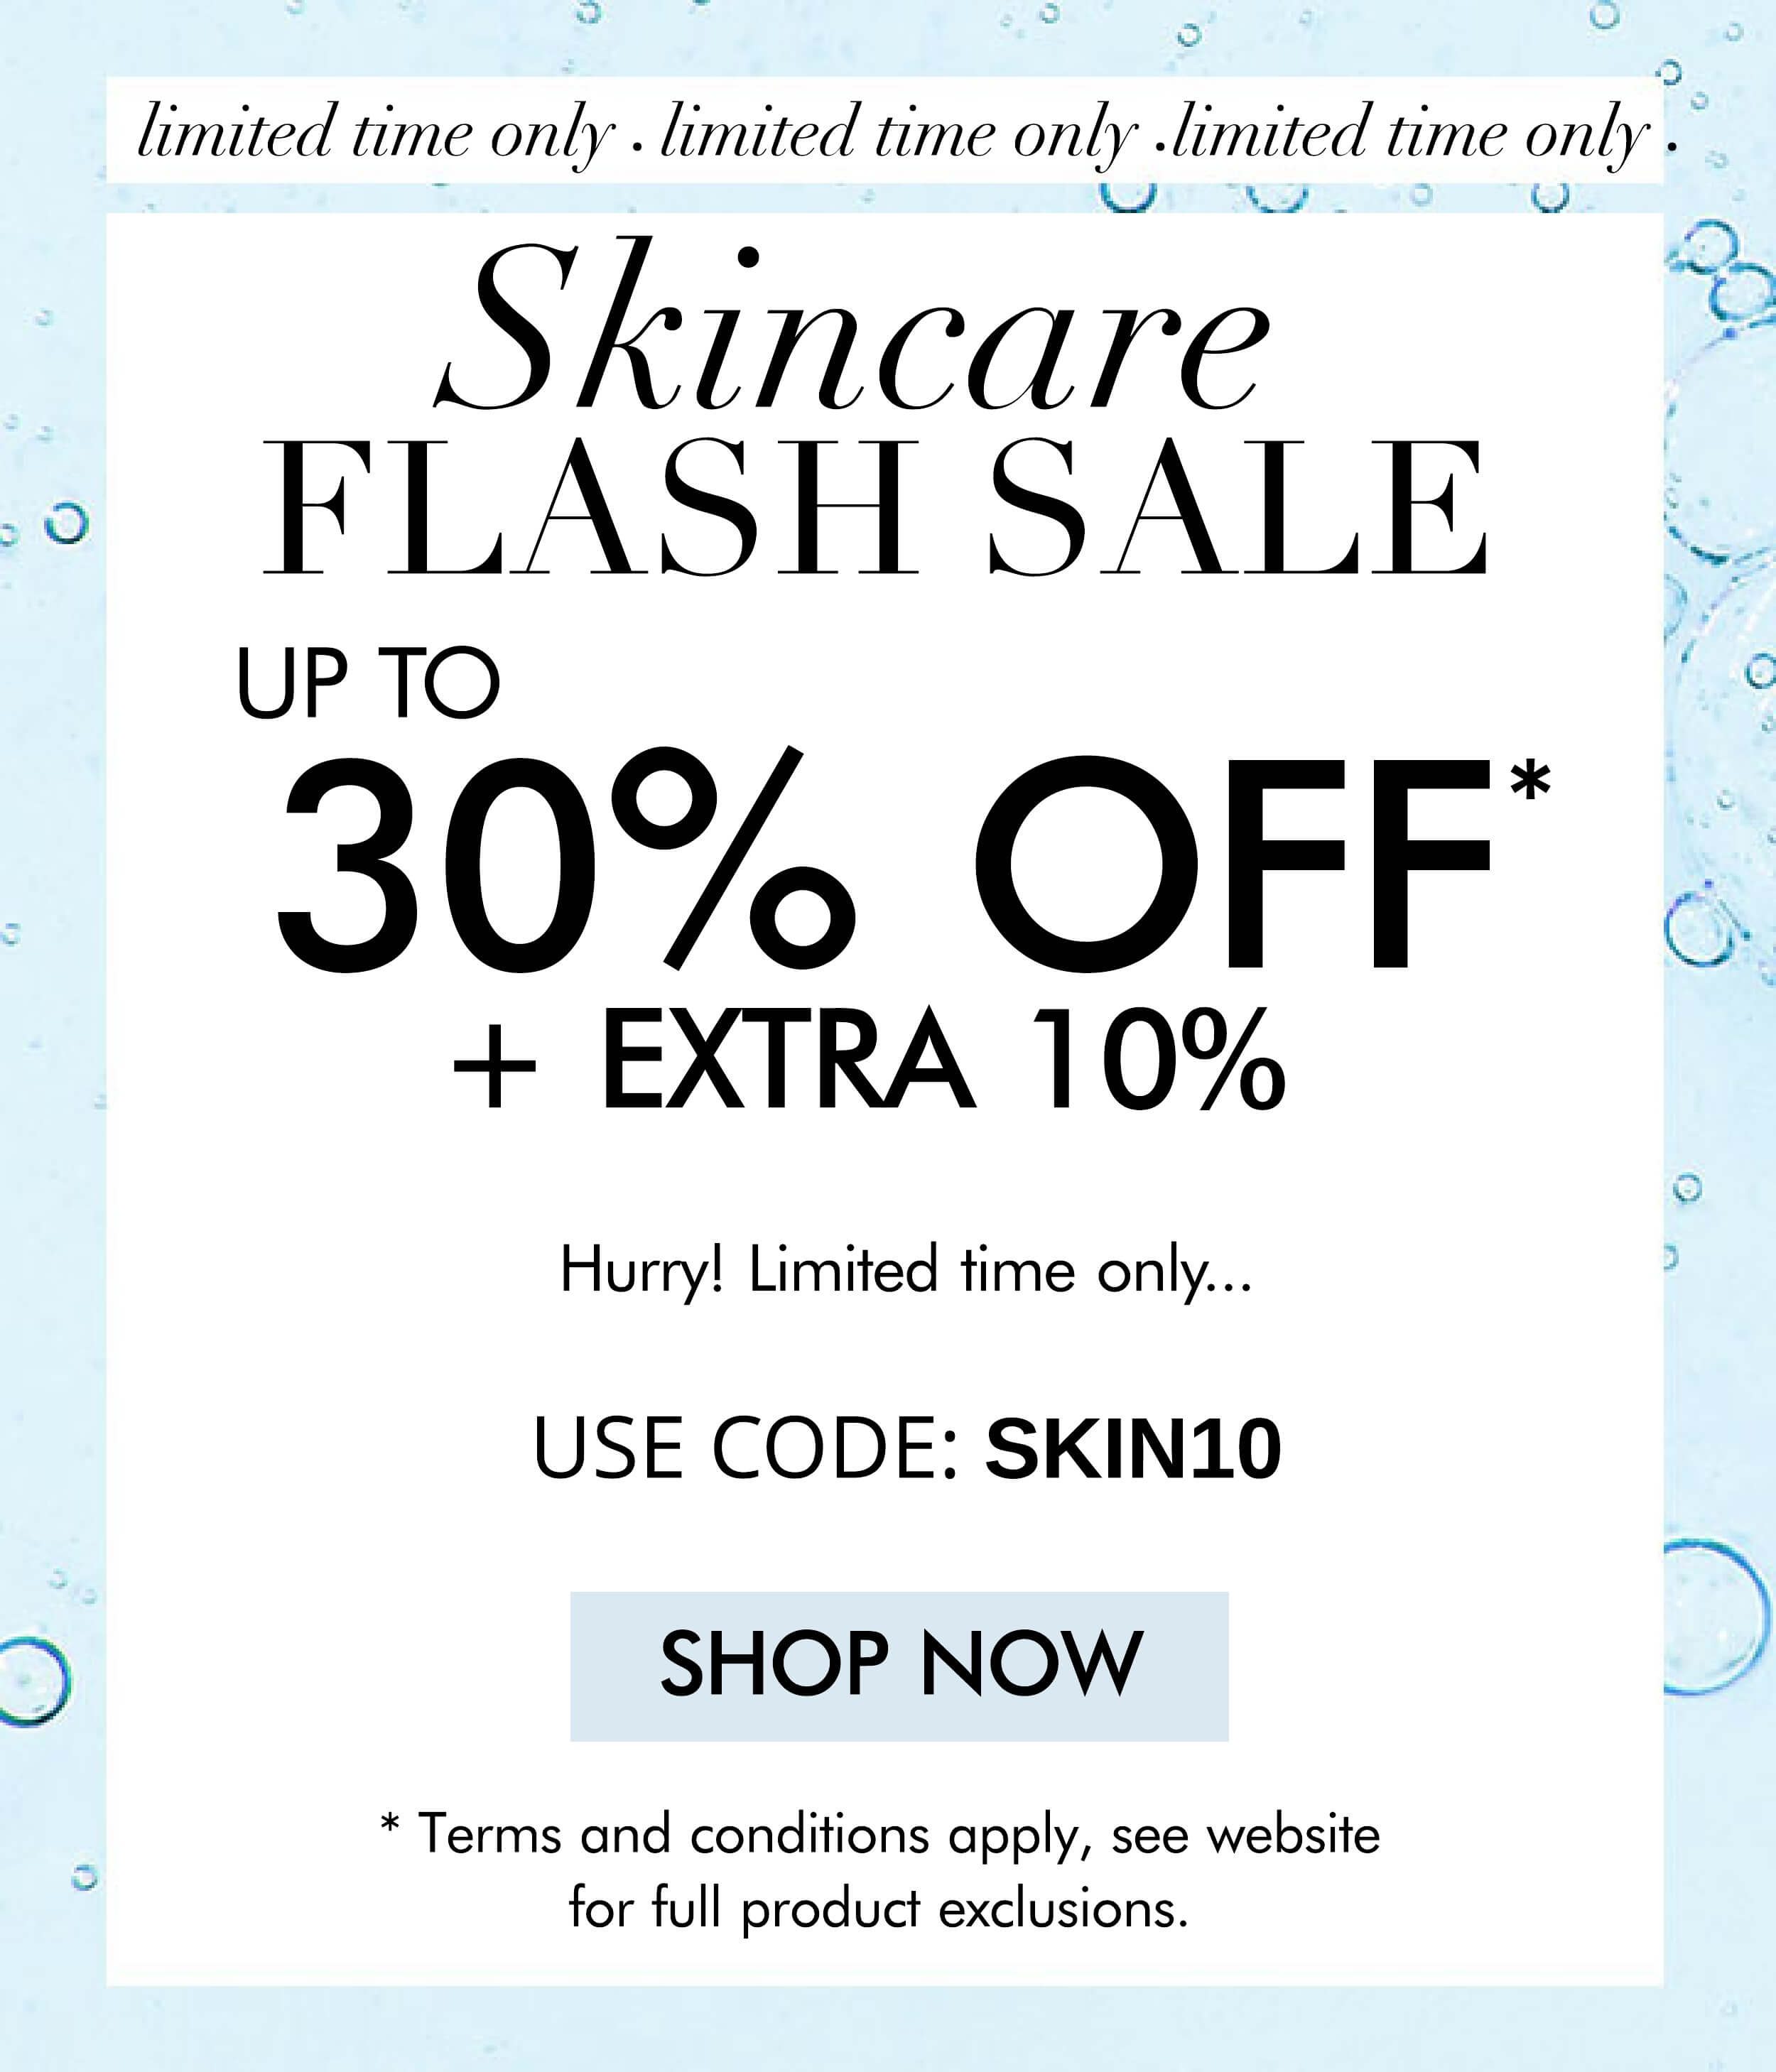 UP TO 30 PERCNT OFF SKINCARE PLUS EXTRA 10